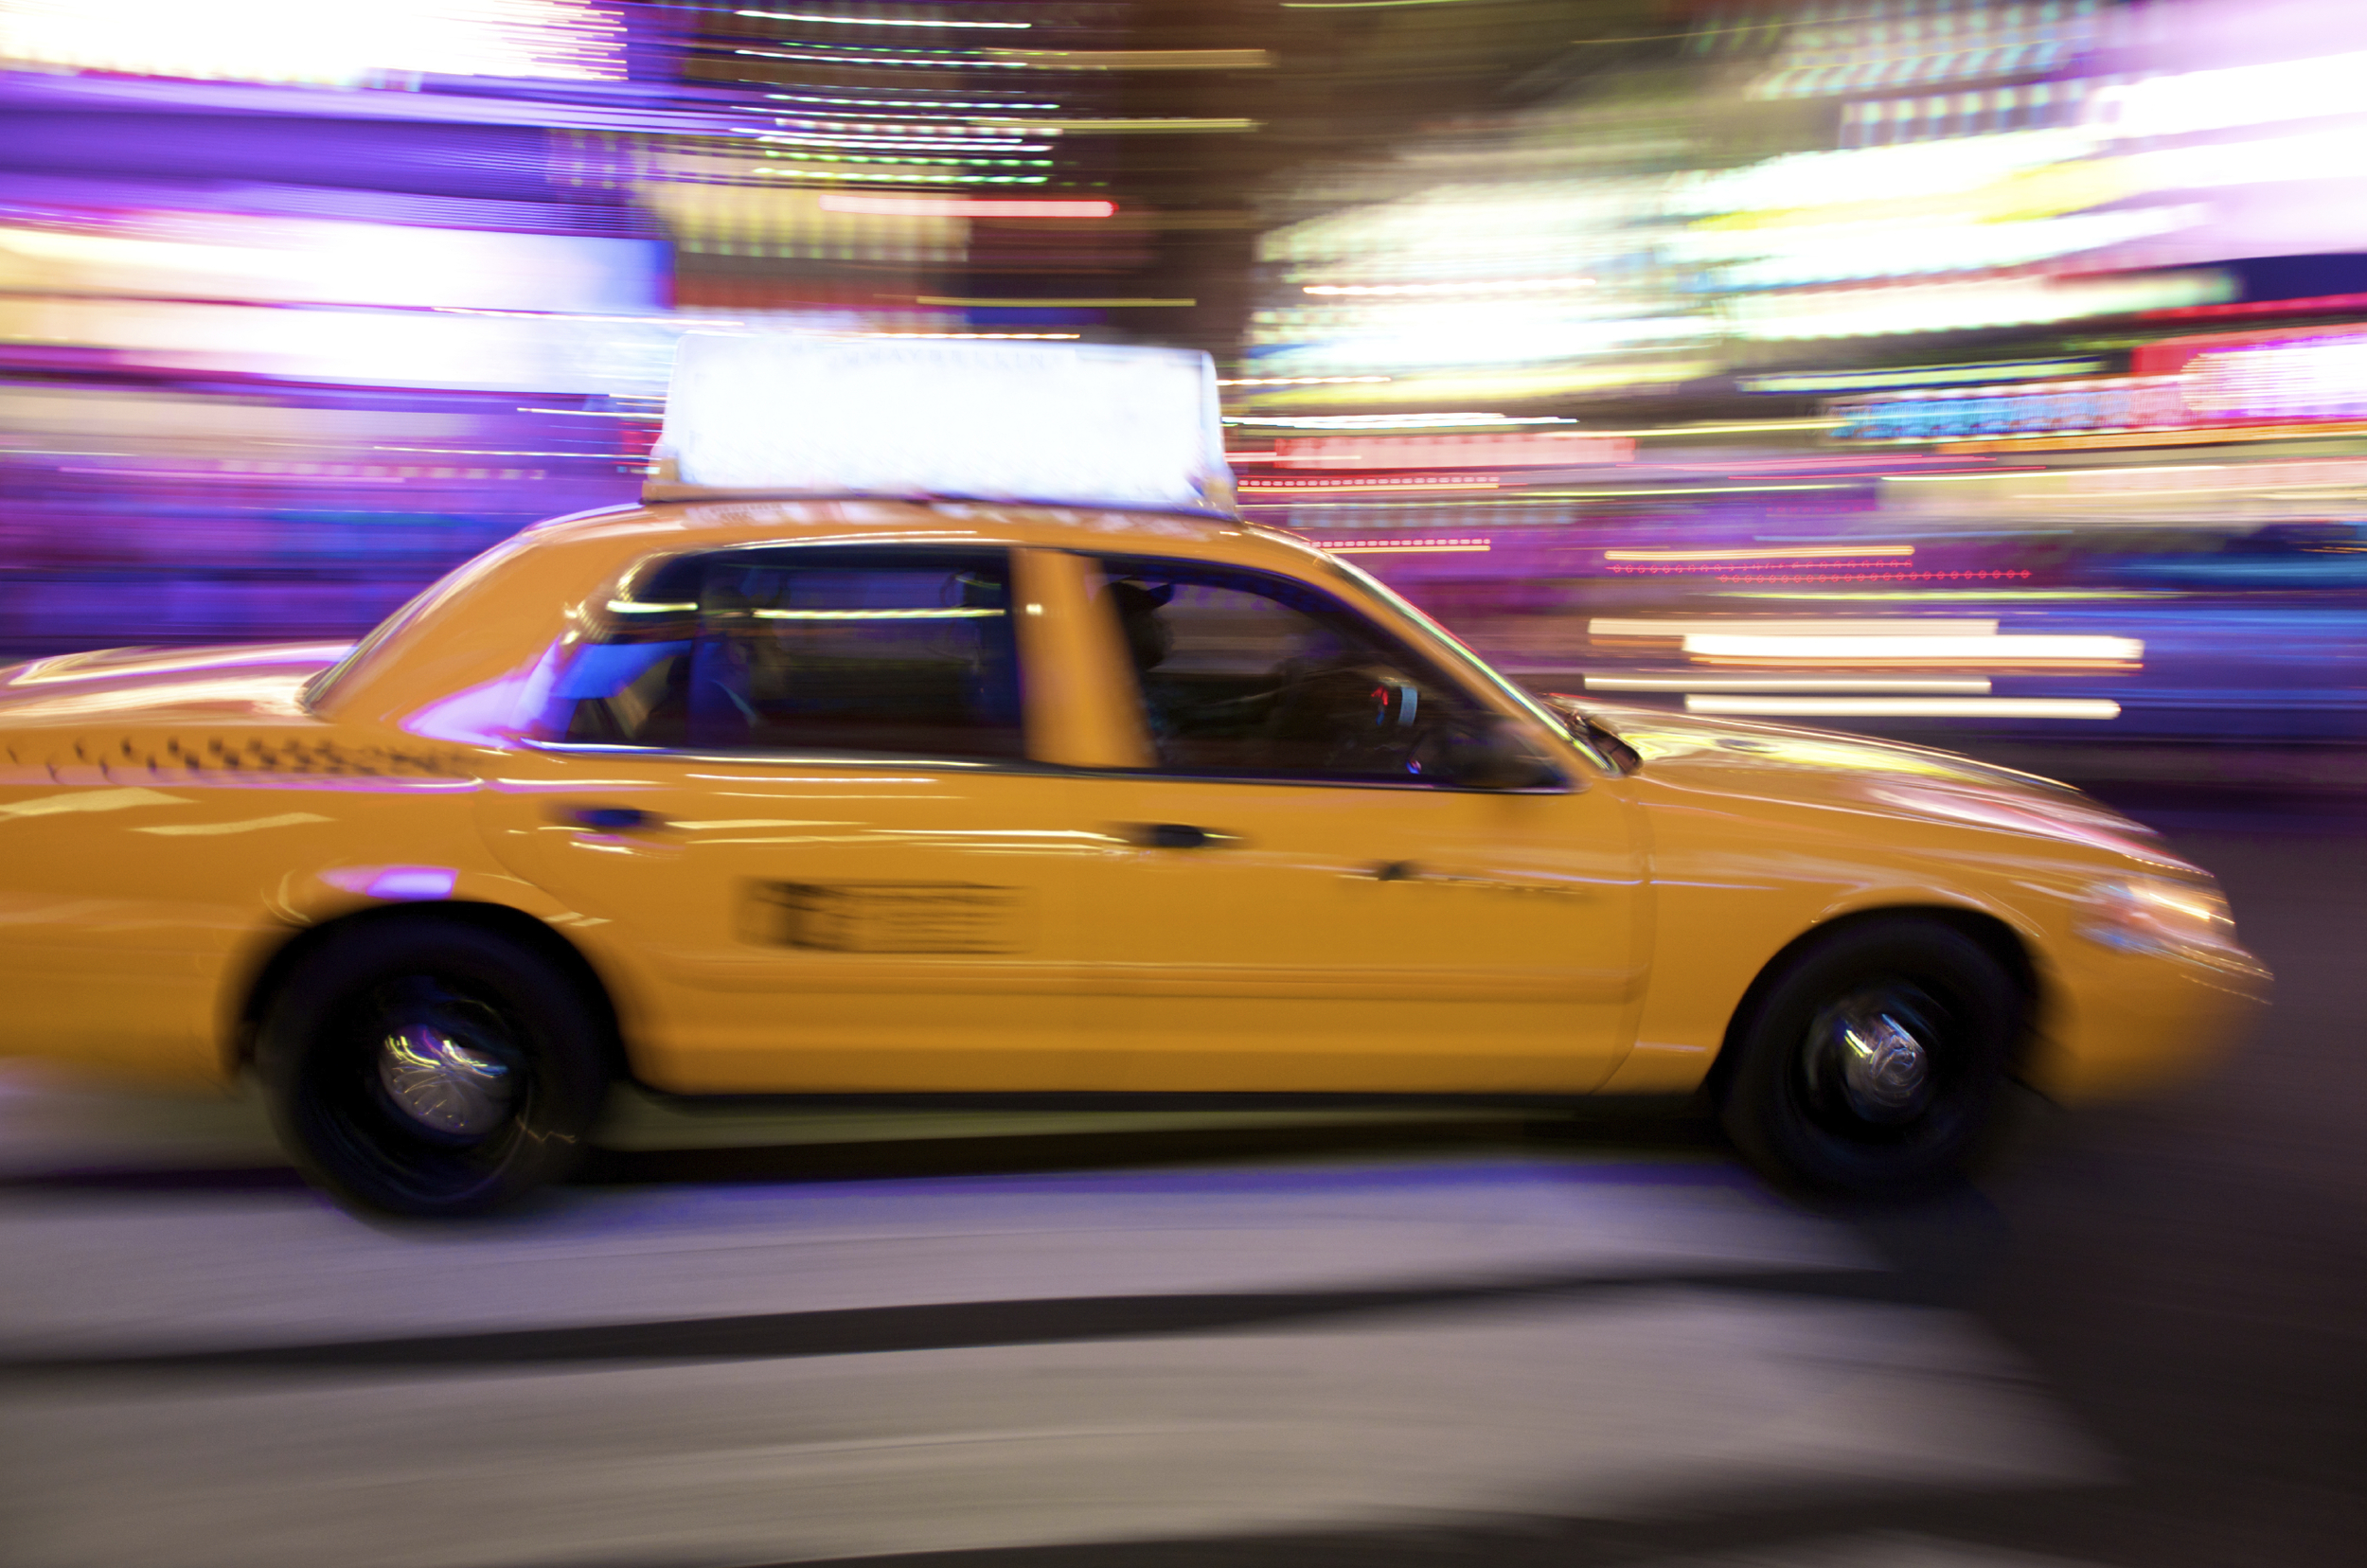 NYC Yellow Taxi 